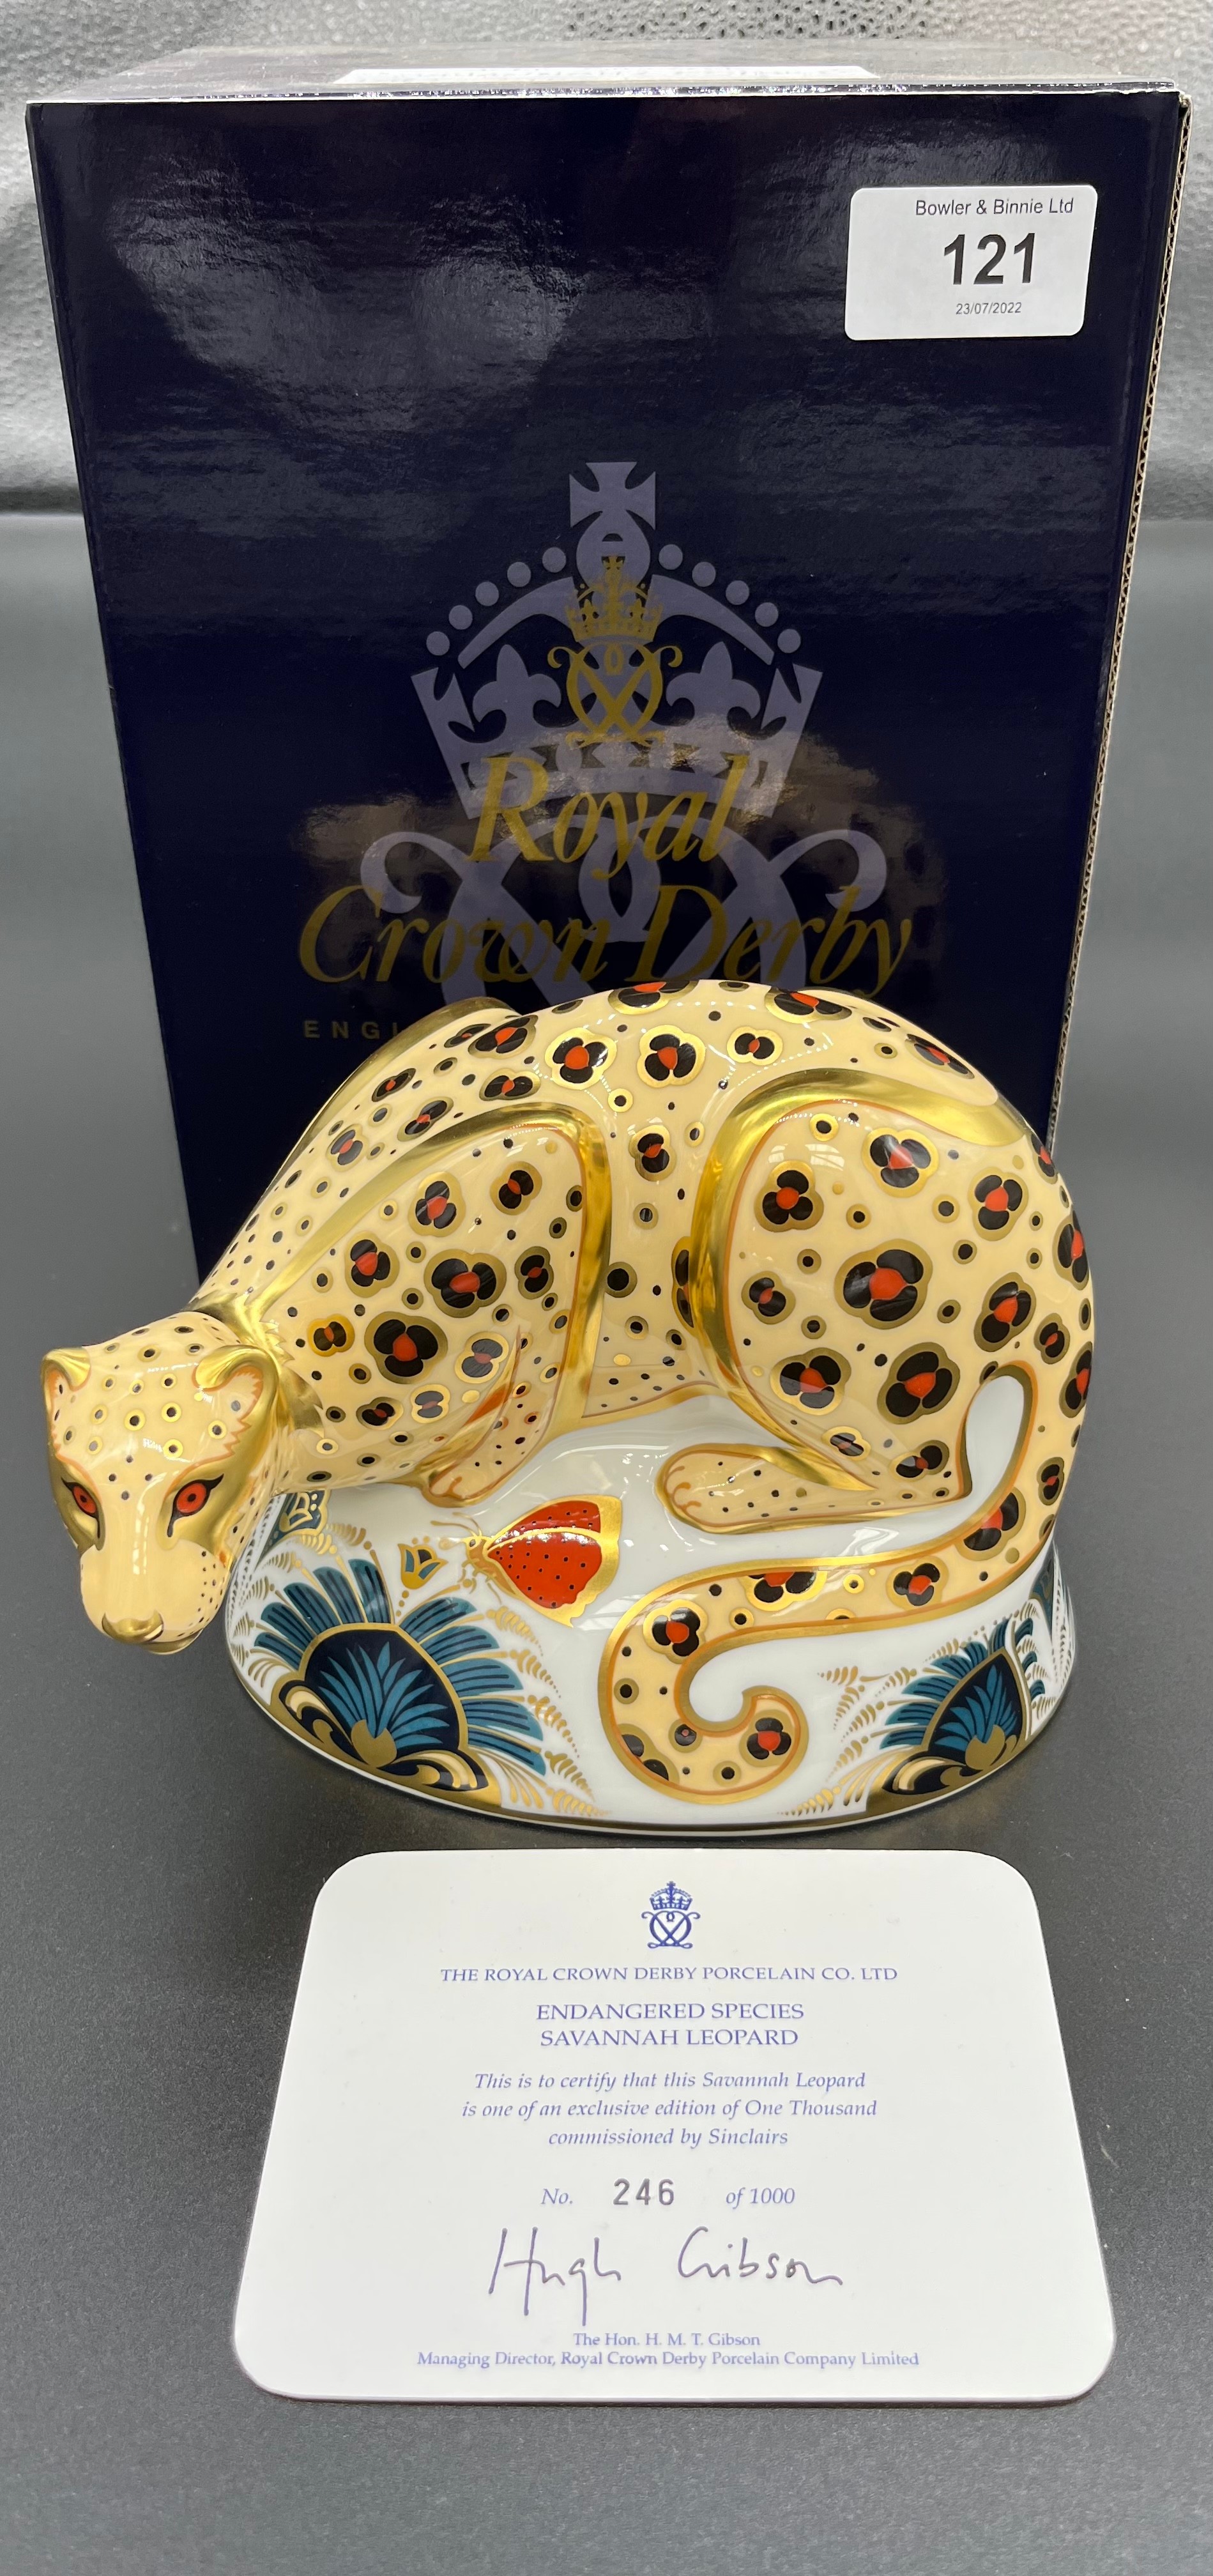 Royal Crown Derby paperweight 'Endangered Species Savannah Leopard' Limited edition 246 of 1000.